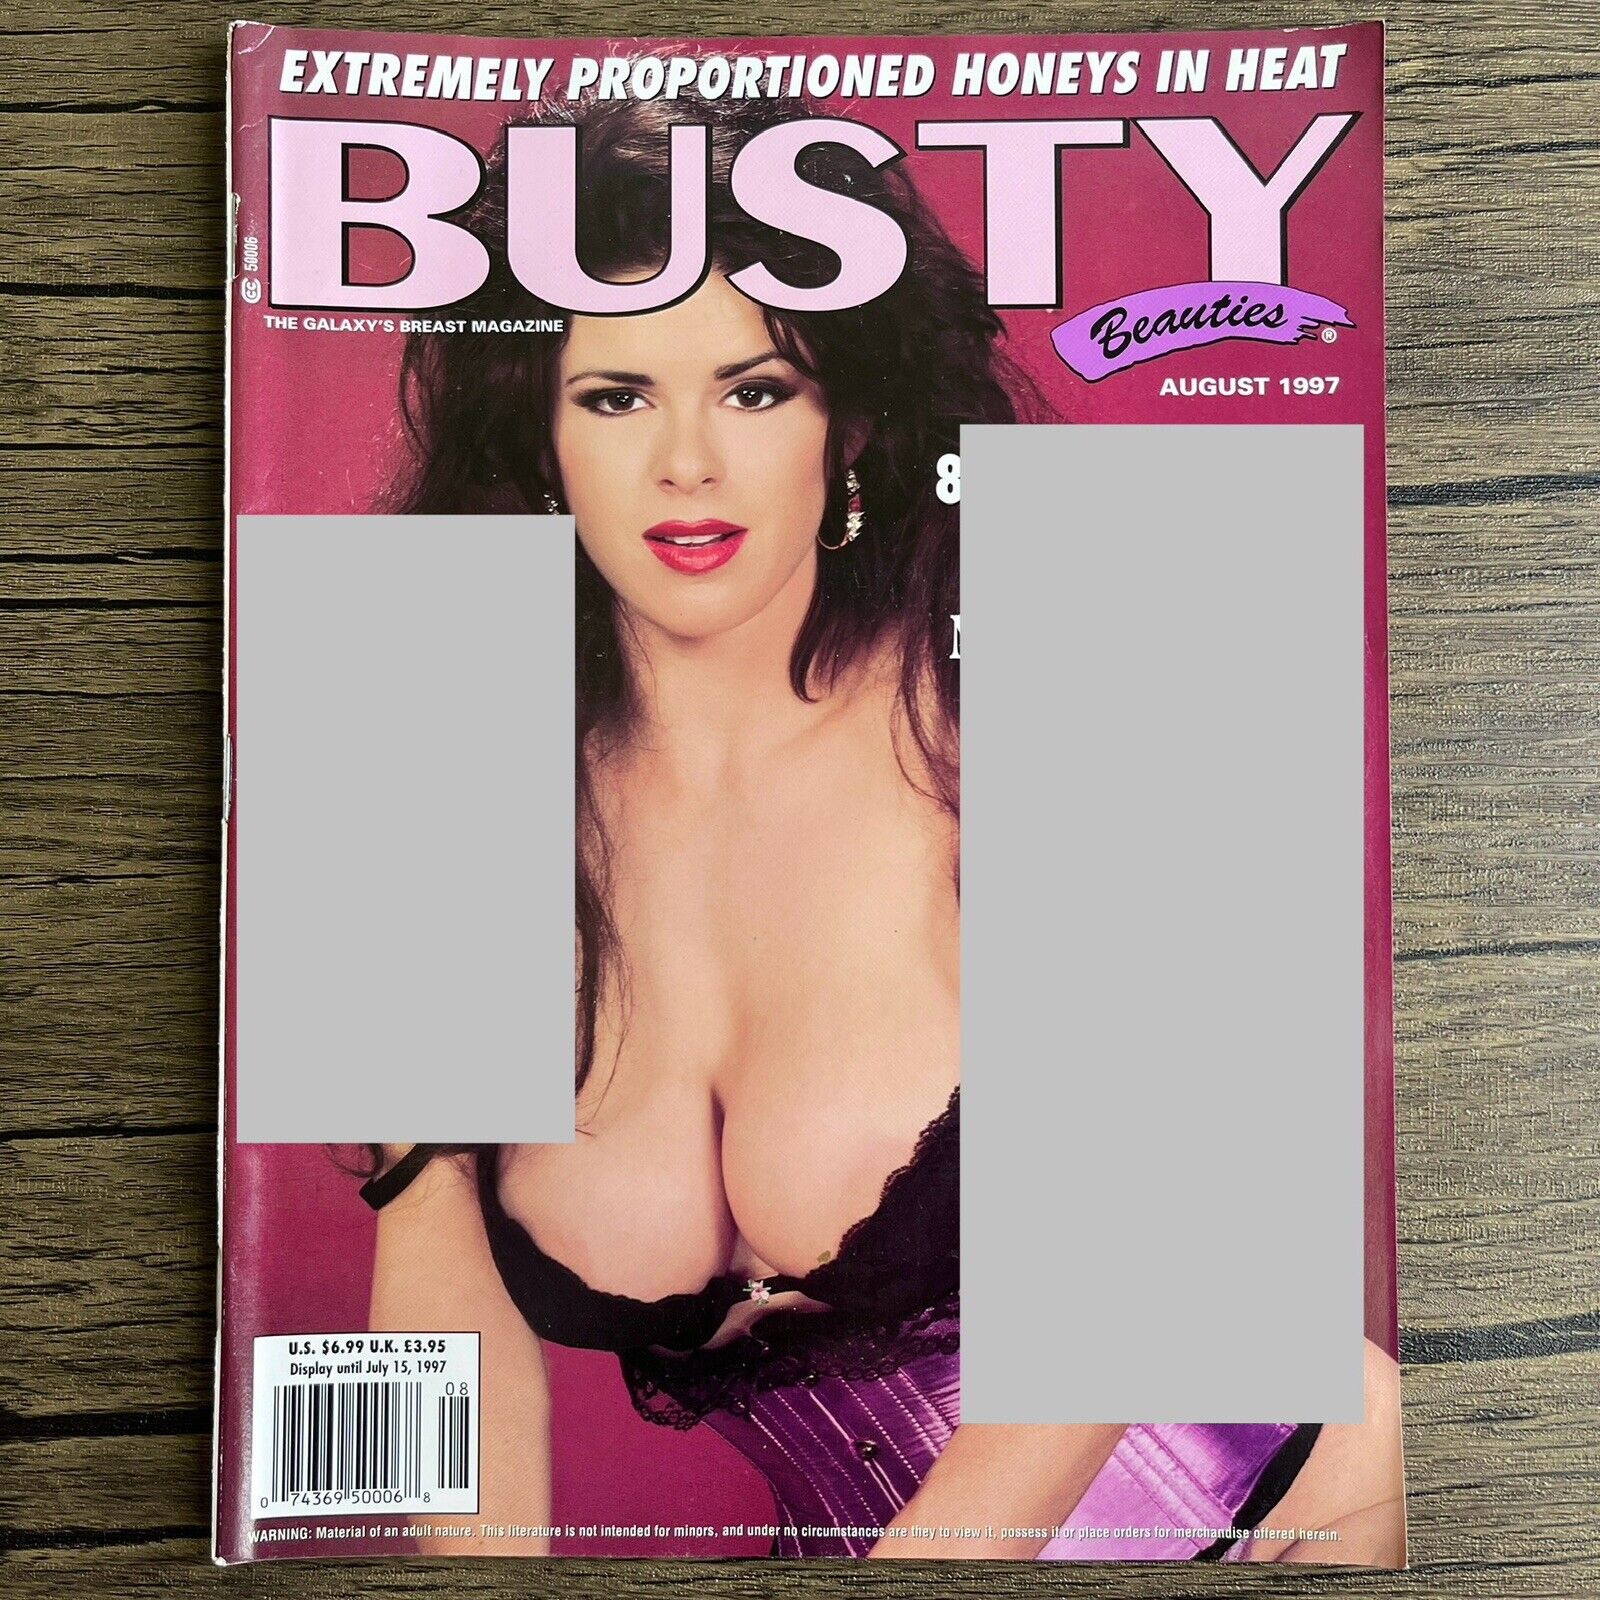 Busty Beauties Magazine August 1997